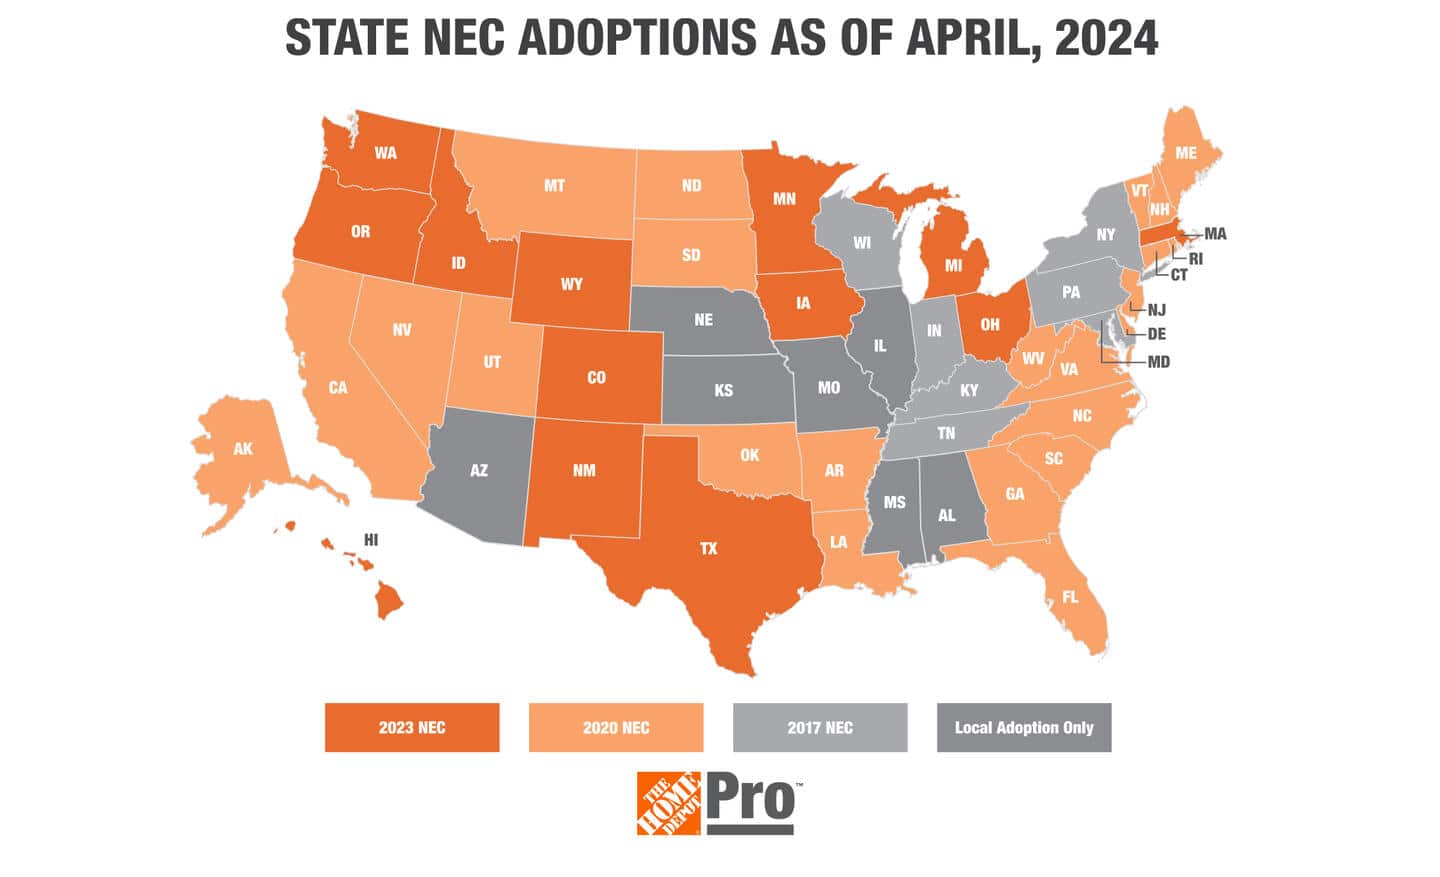 A map shows NEC adoptions by state.